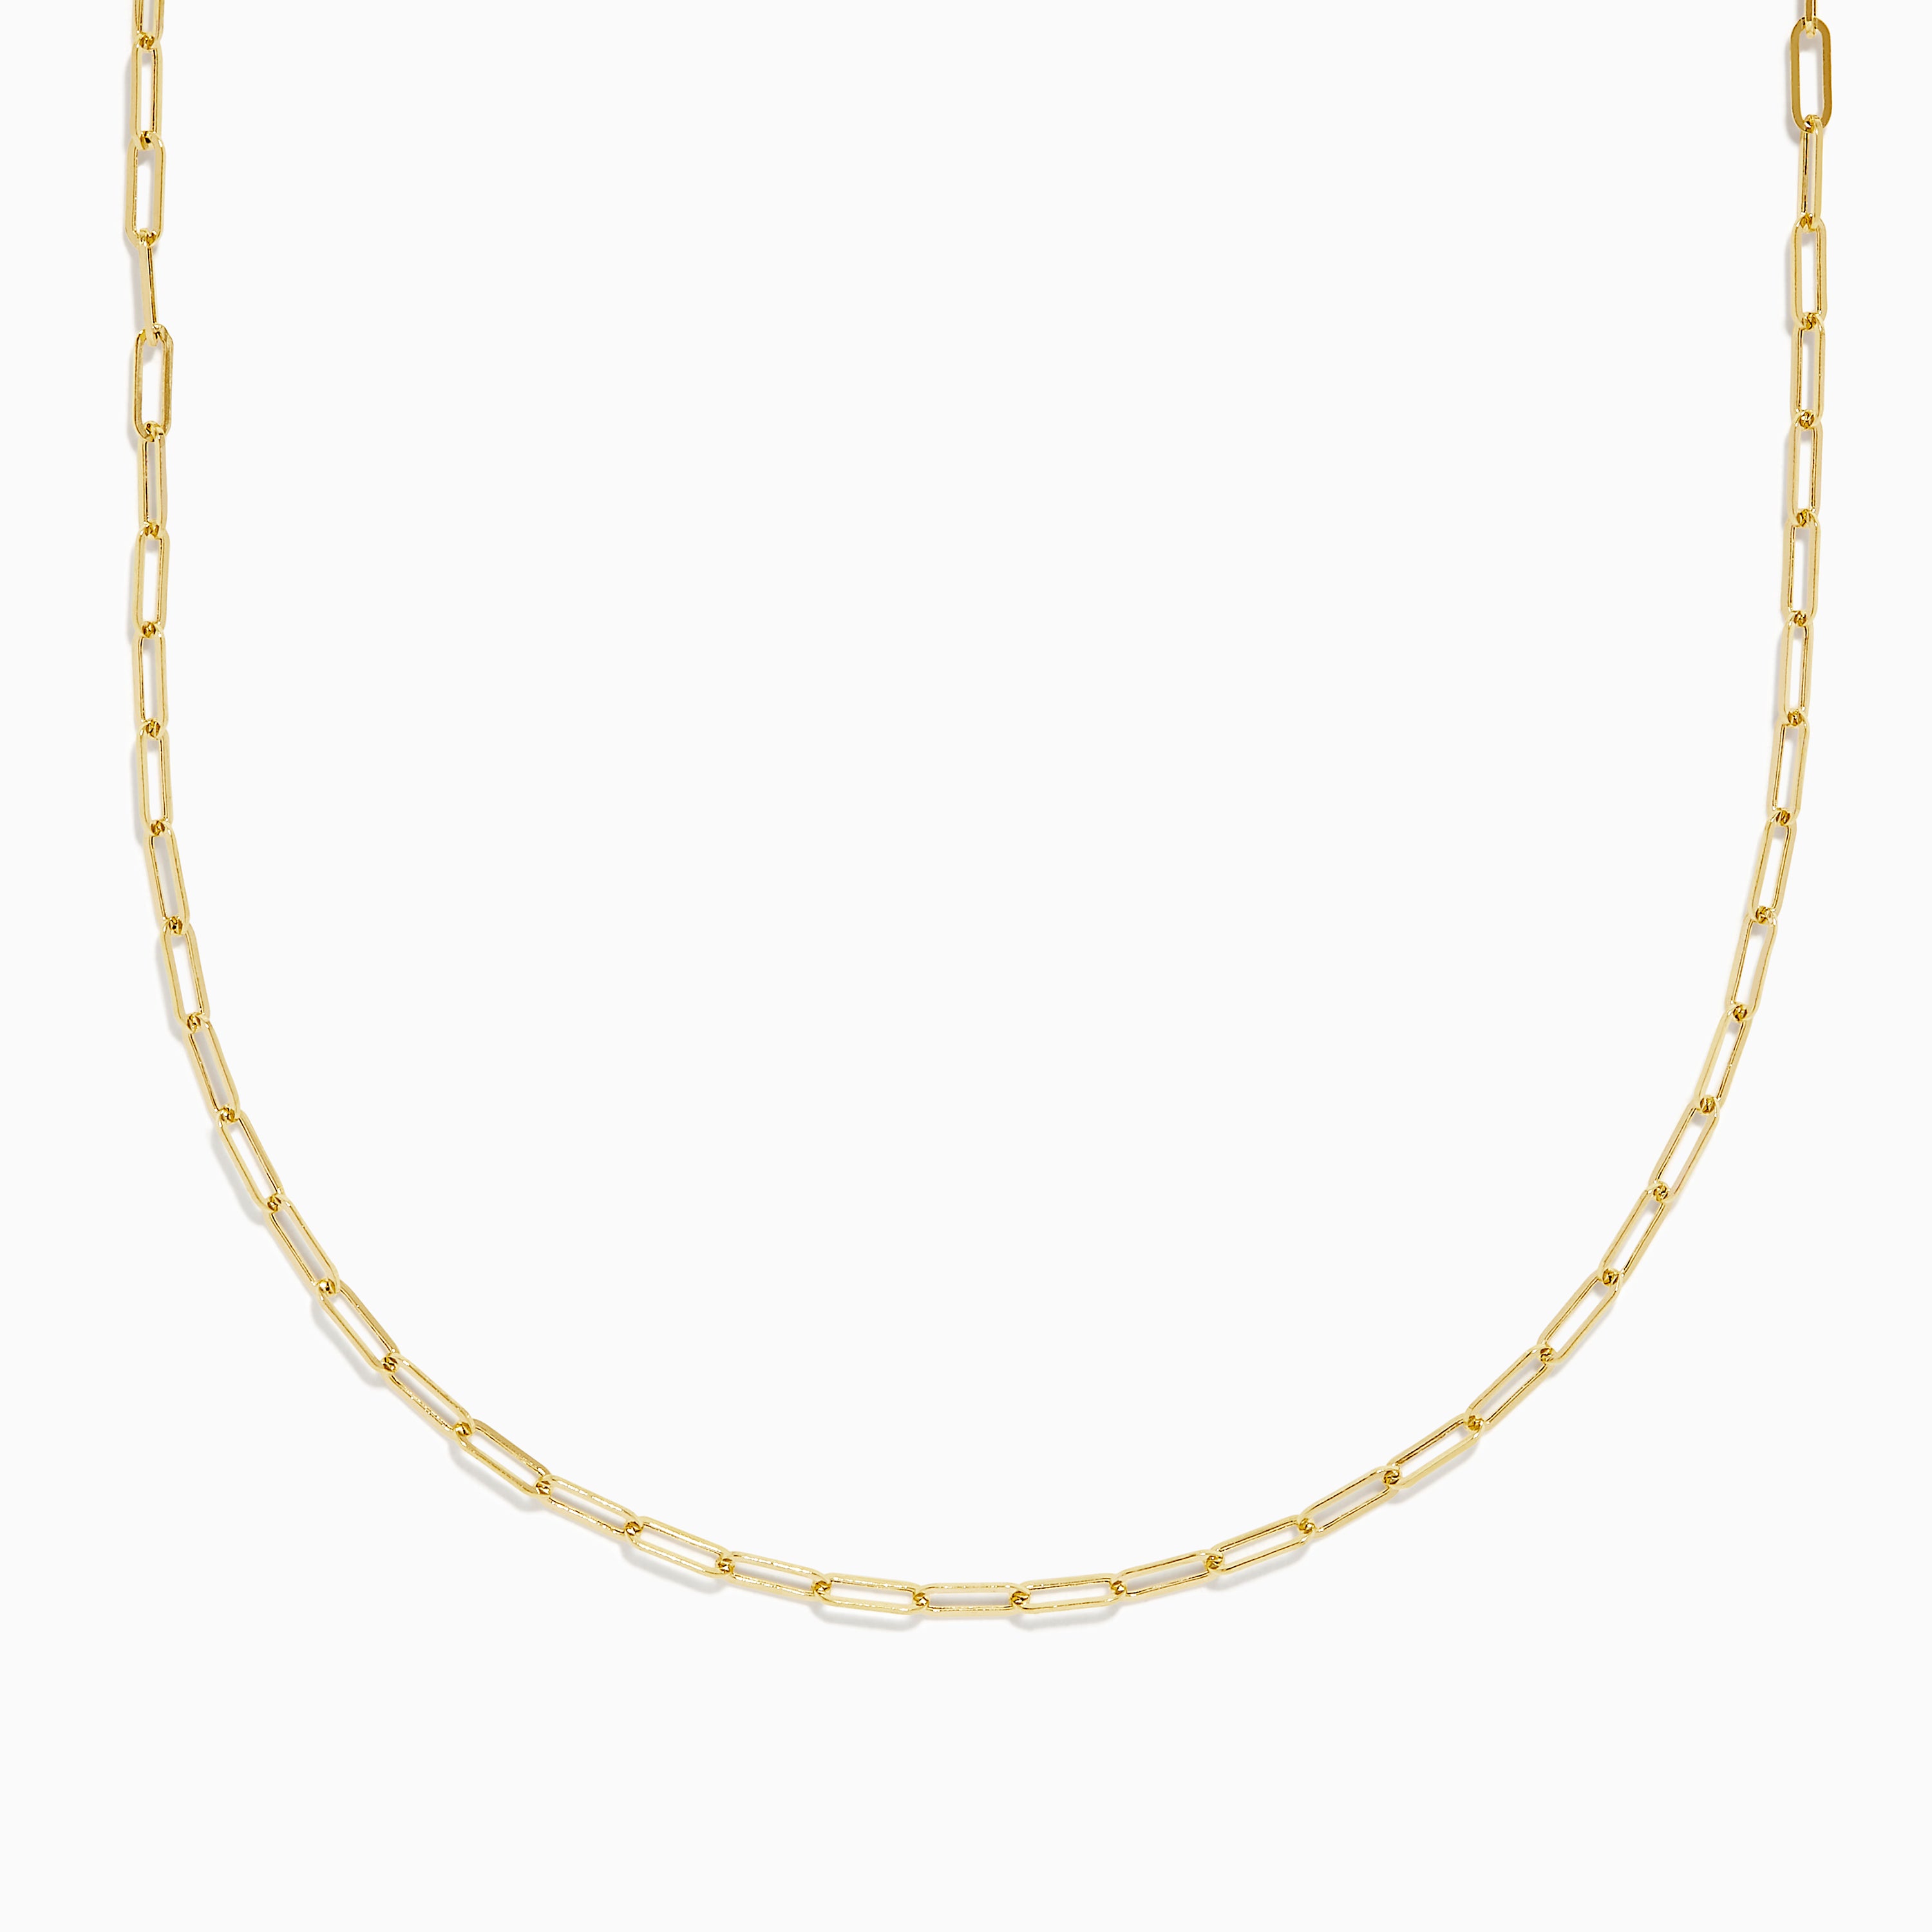 Effy 14K Yellow Gold 20" 2.5mm Paperclip Necklace